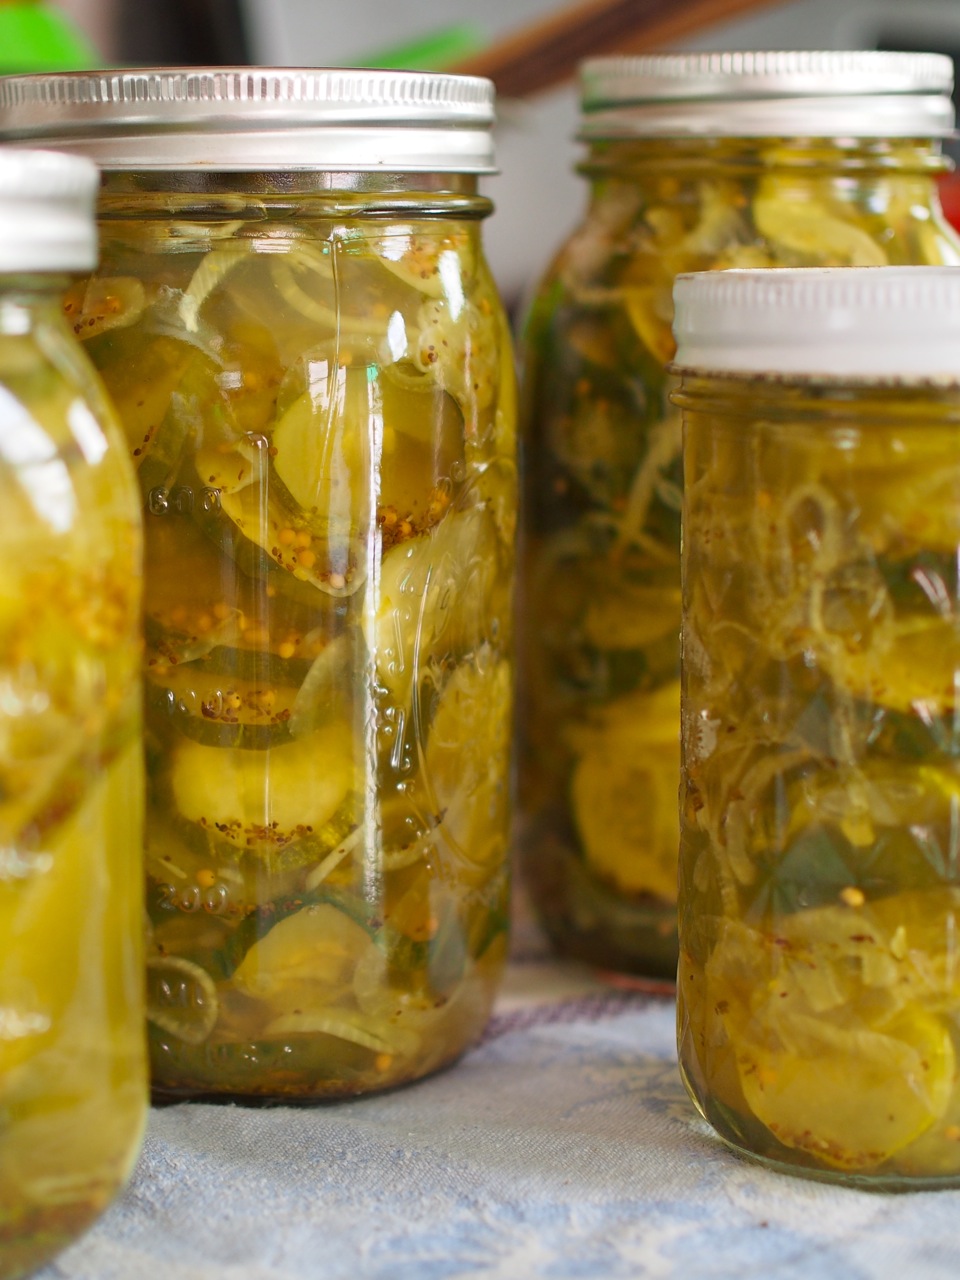 Finished bread-and-butter pickles